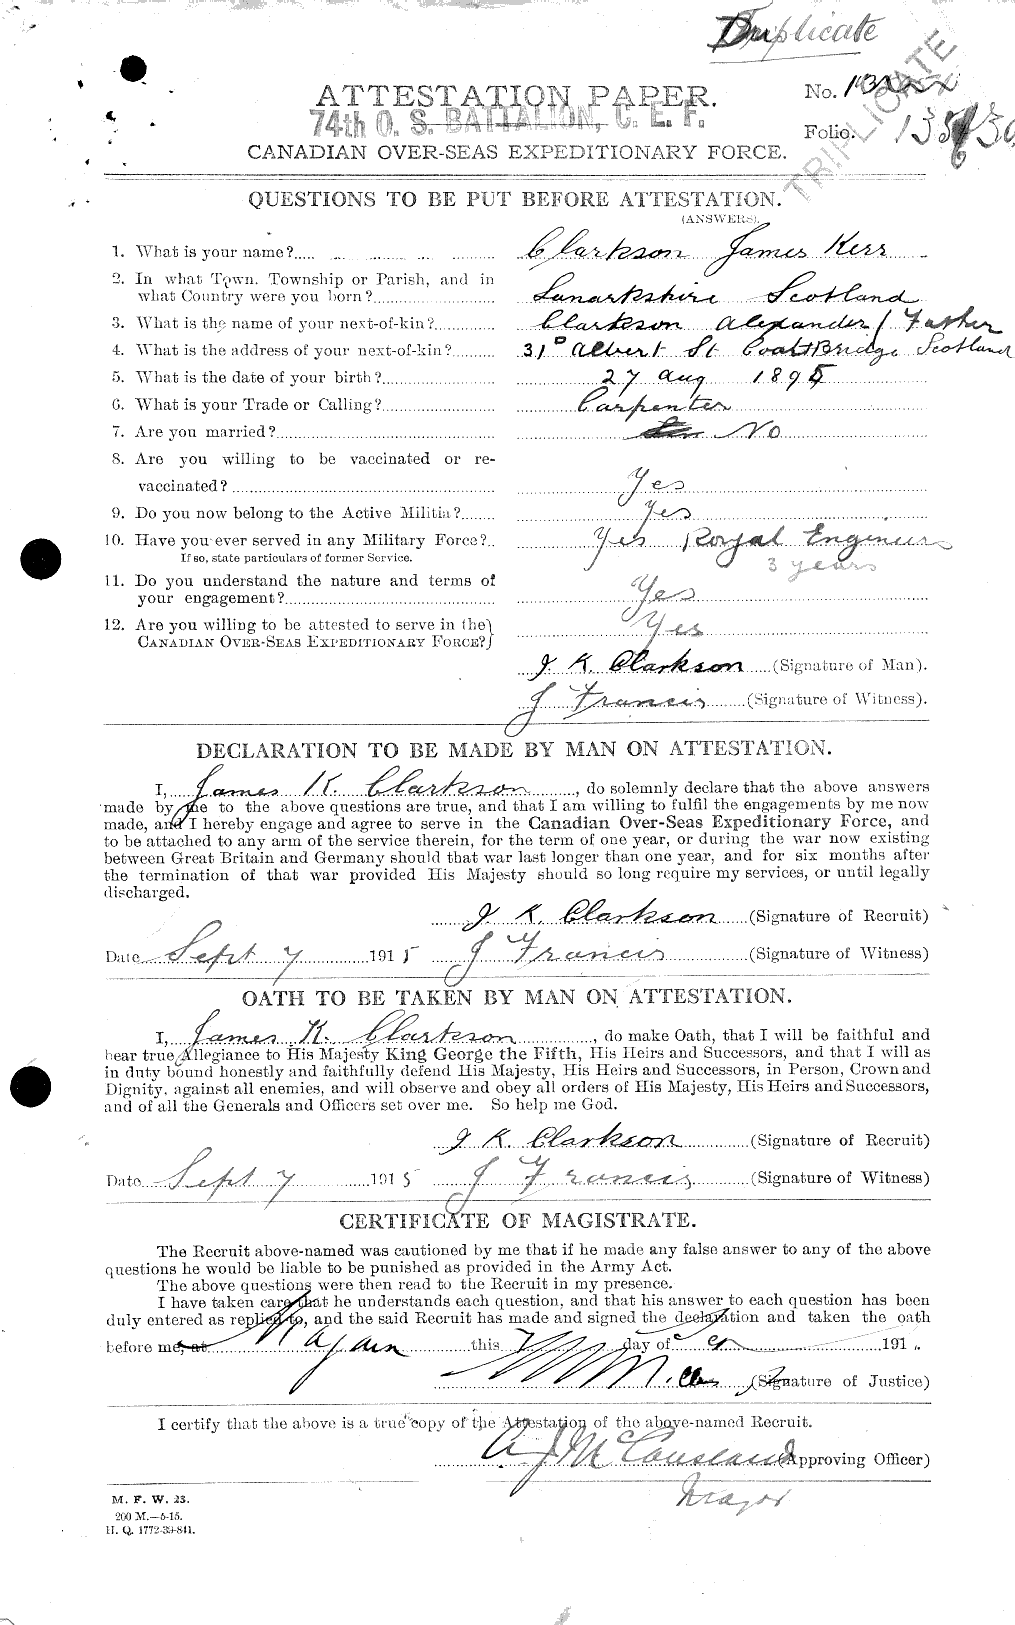 Personnel Records of the First World War - CEF 021448a